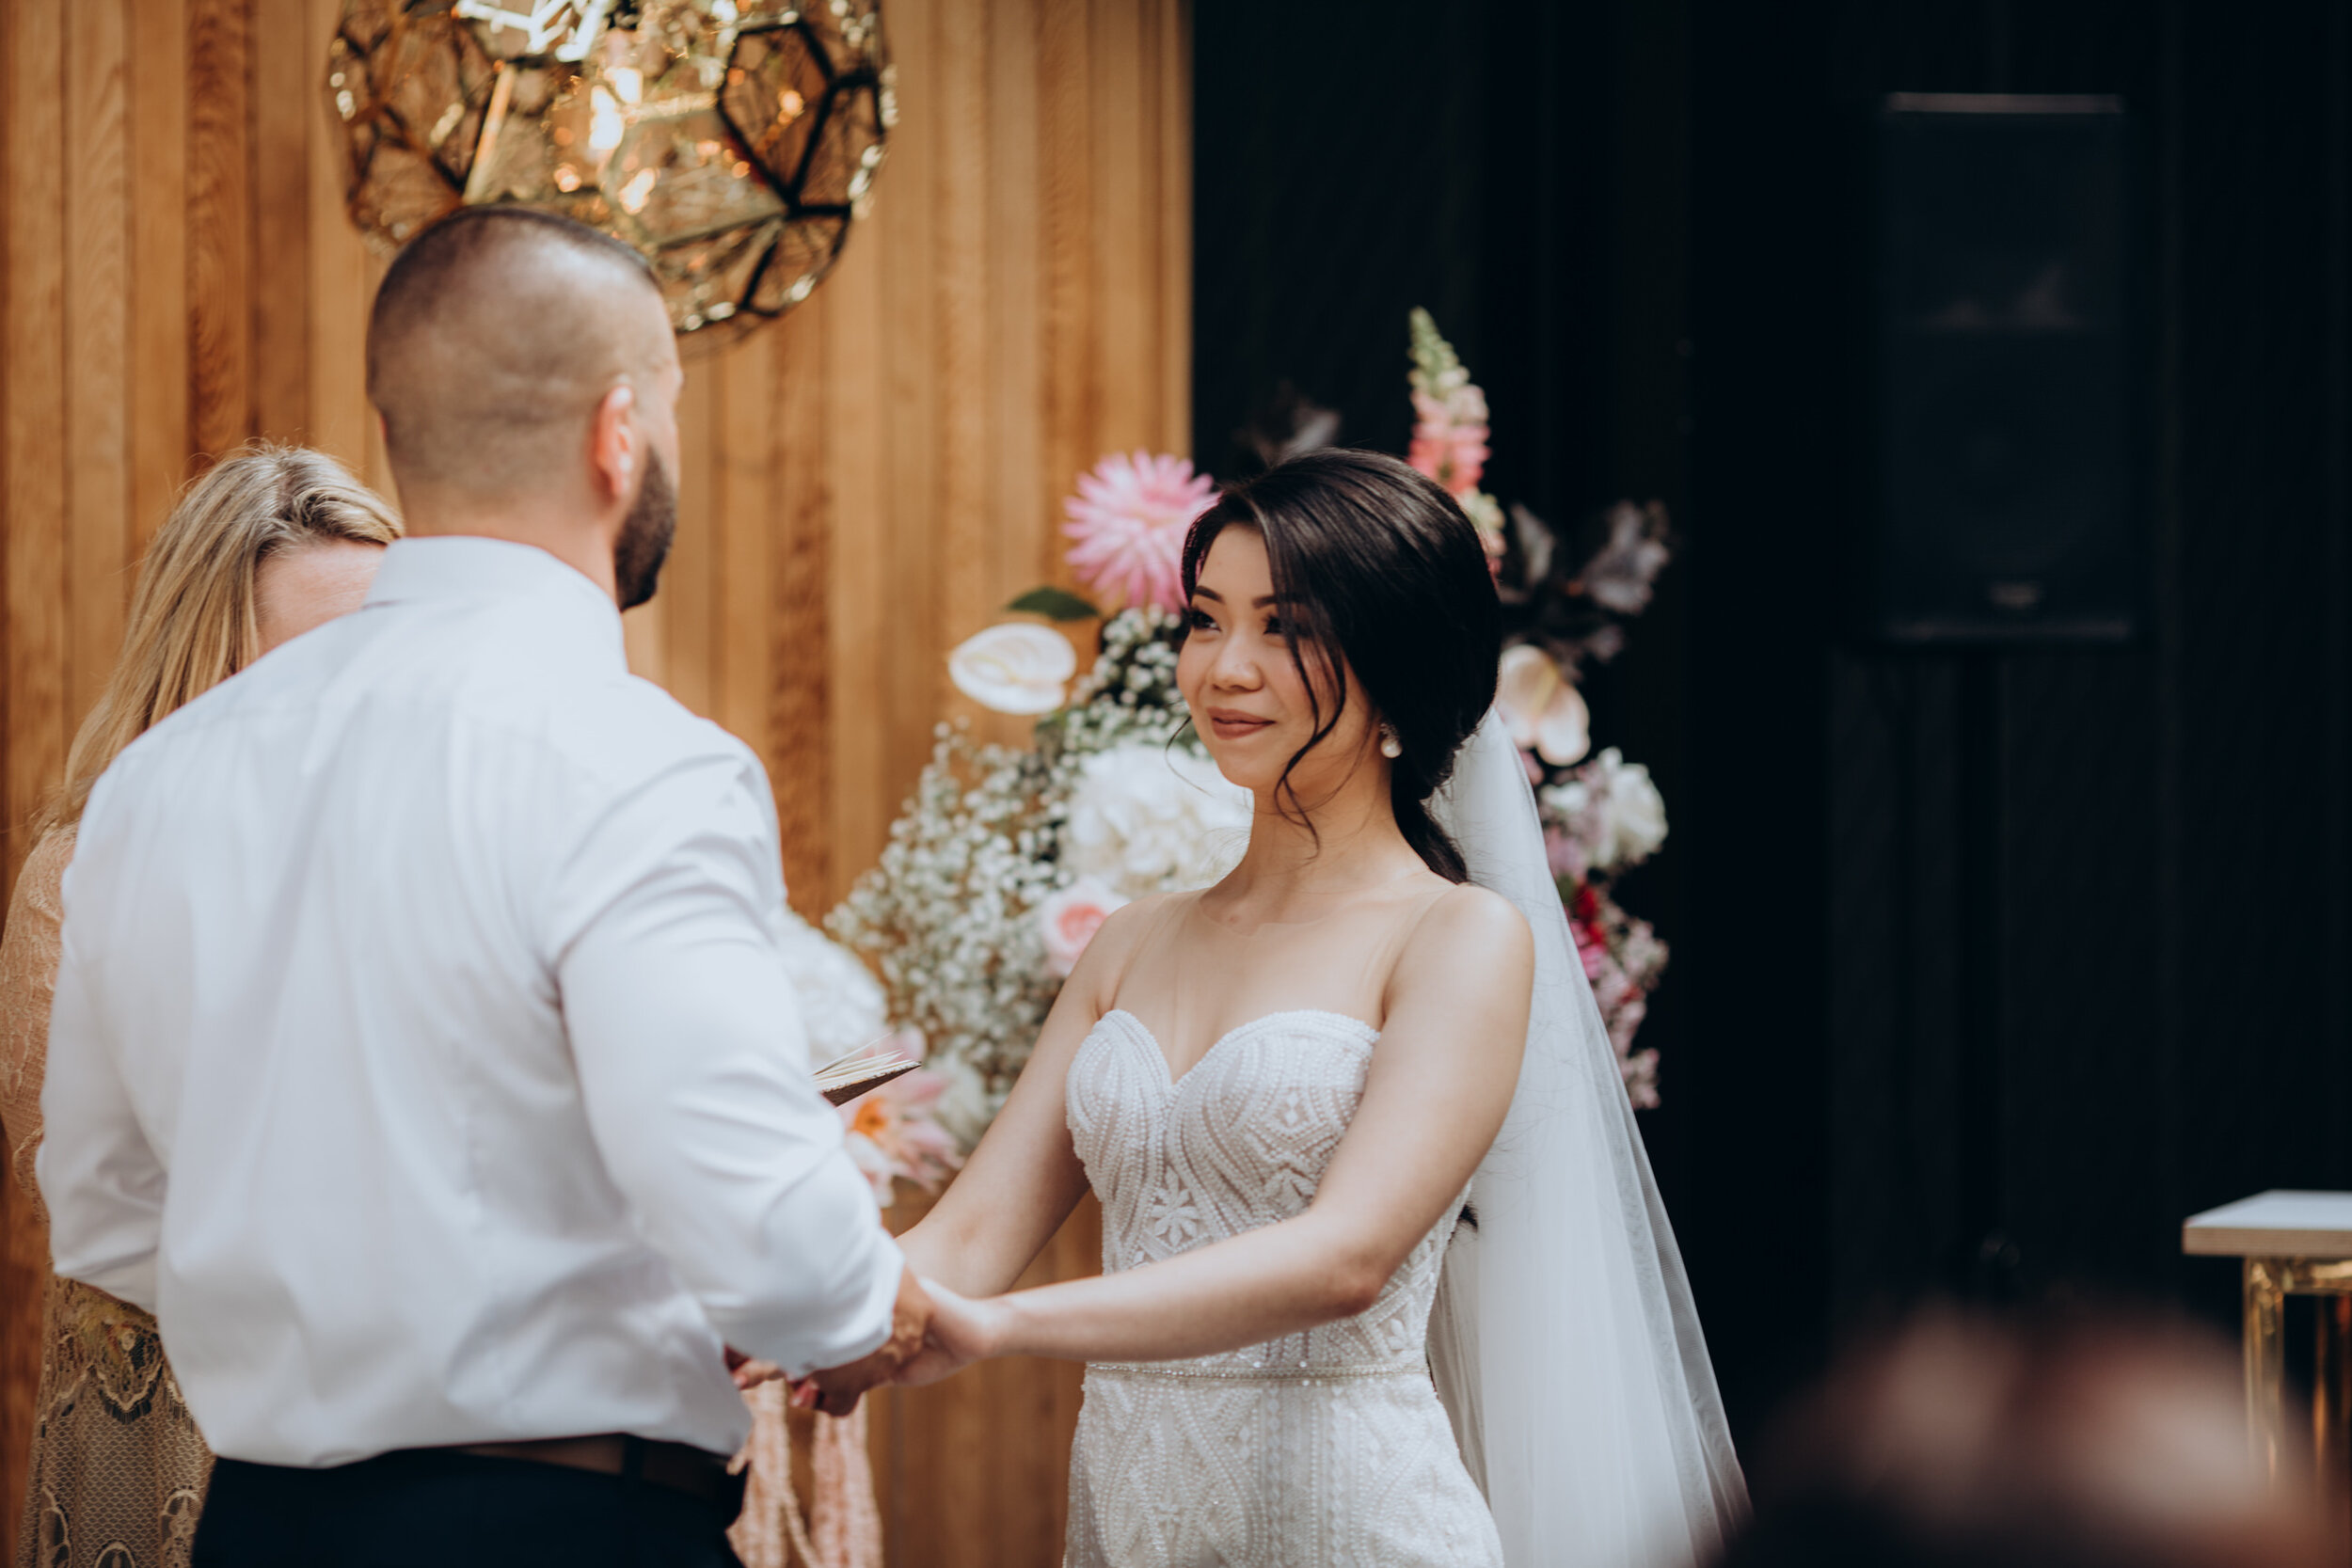 Glasshouse morningside | Auckland | Auckland wedding photographer | Wanting Huang Photography 